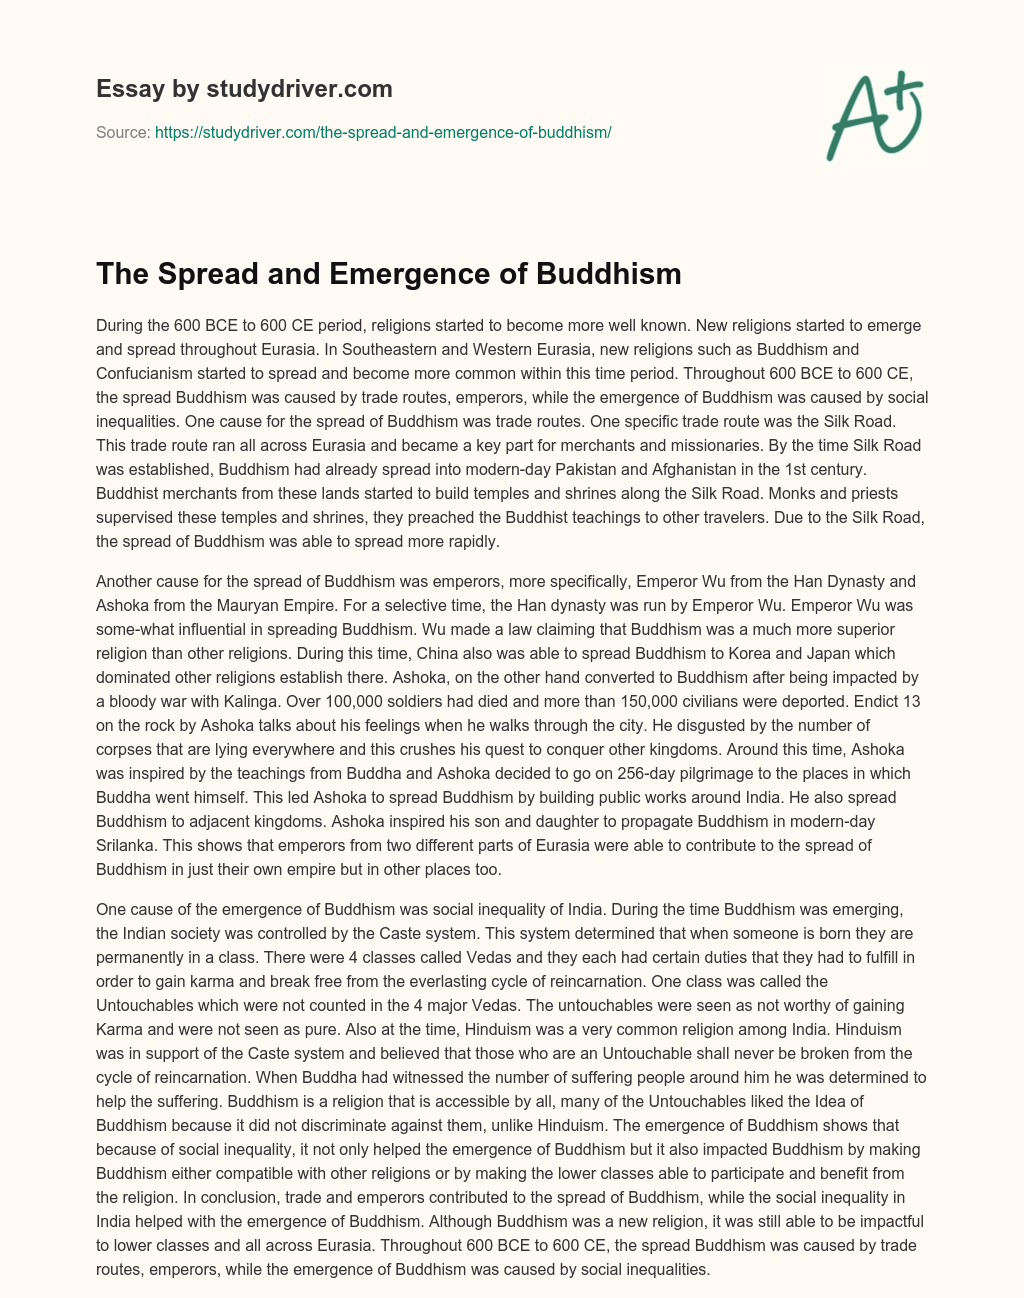 The Spread and Emergence of Buddhism essay